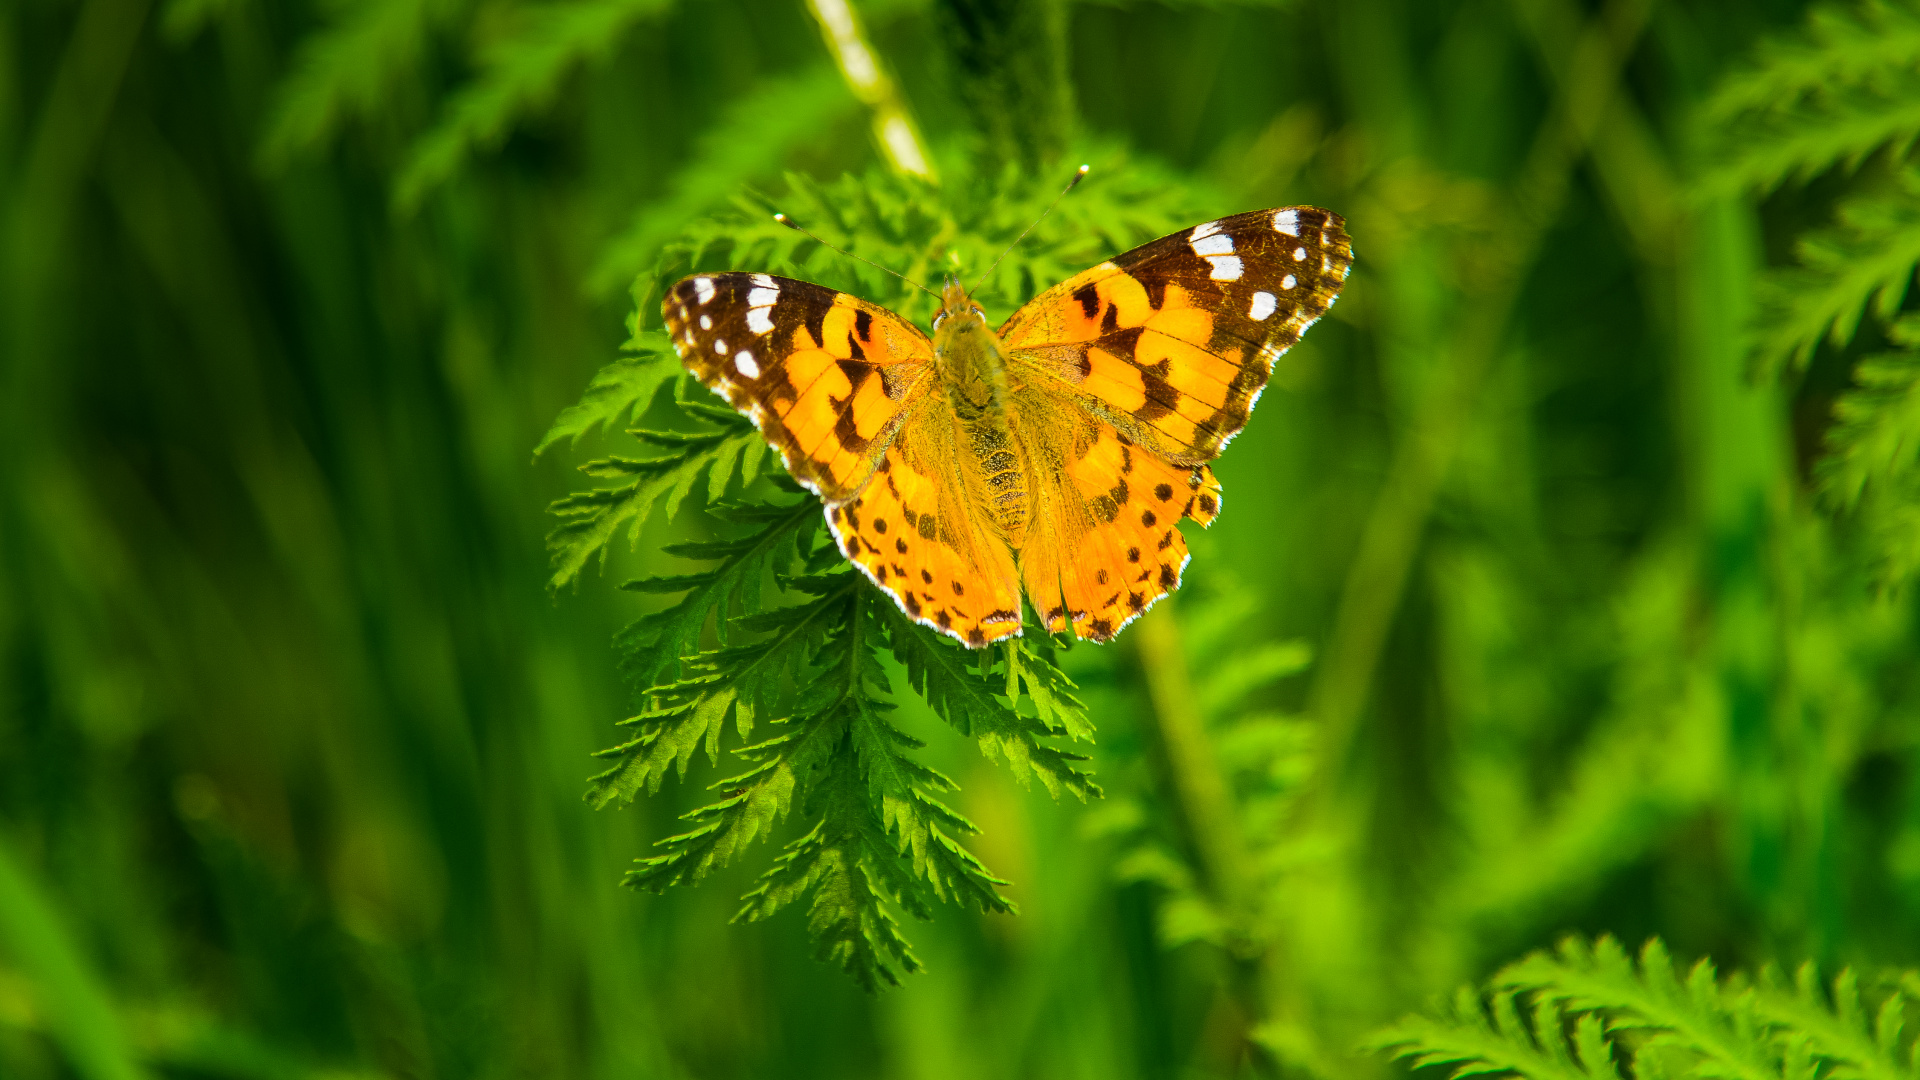 Yellow and Black Butterfly on Green Plant. Wallpaper in 1920x1080 Resolution